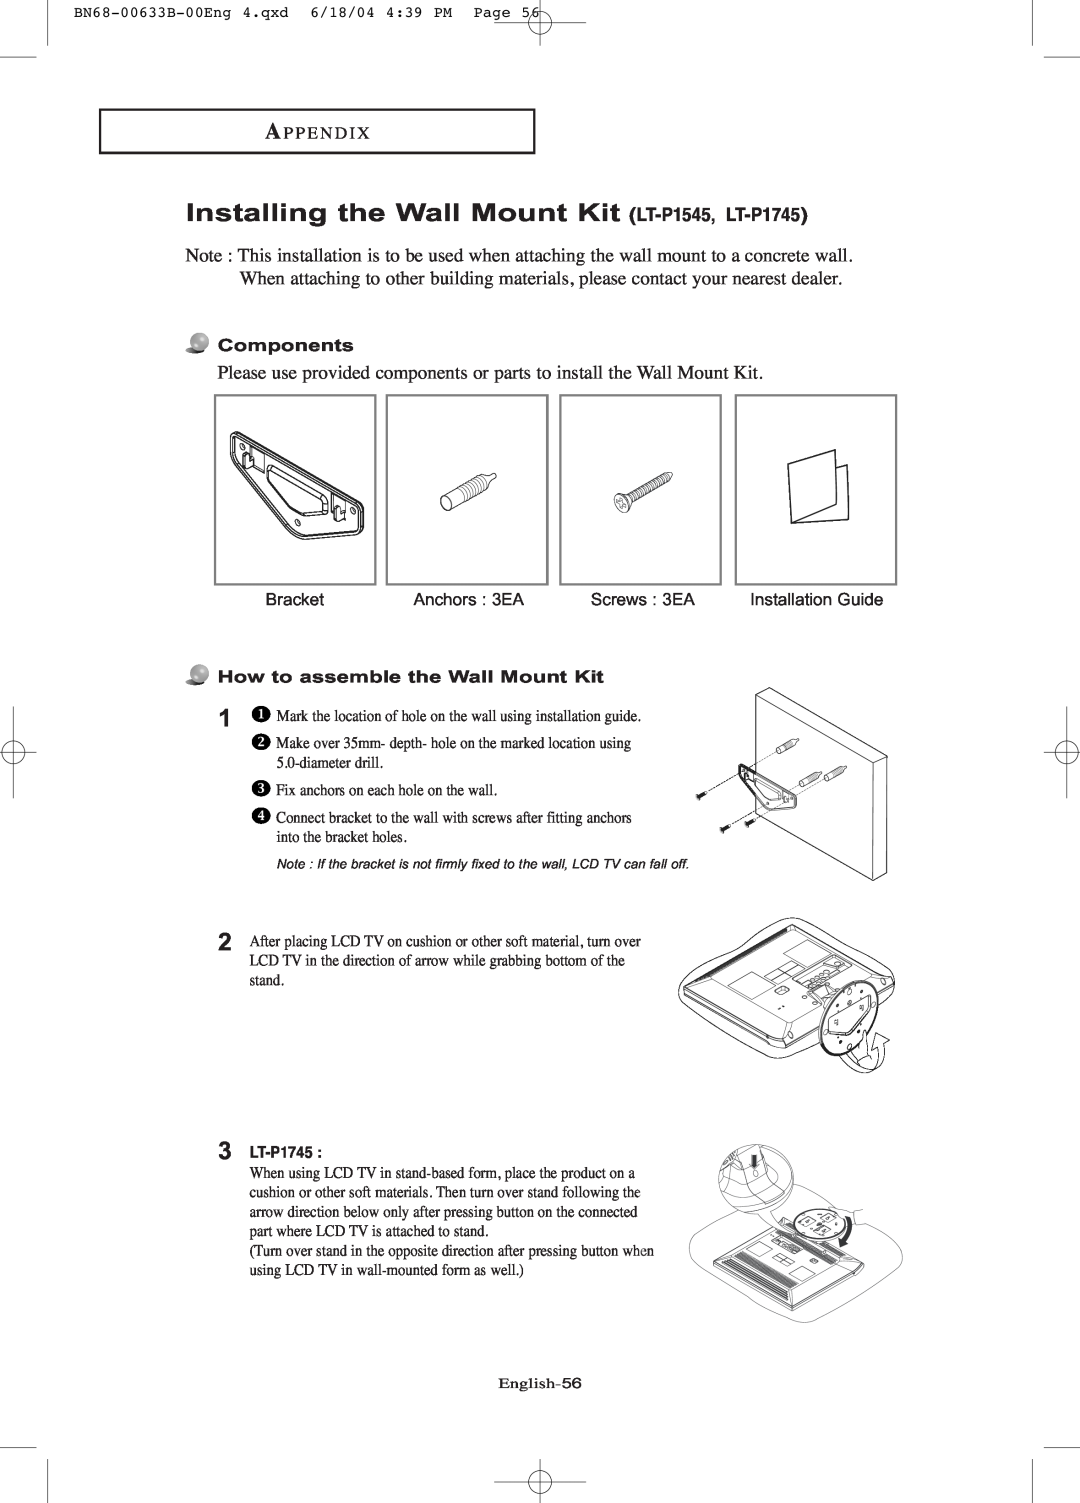 Samsung Installing the Wall Mount Kit LT-P1545, LT-P1745, A P P E N D I, Components, How to assemble the Wall Mount Kit 